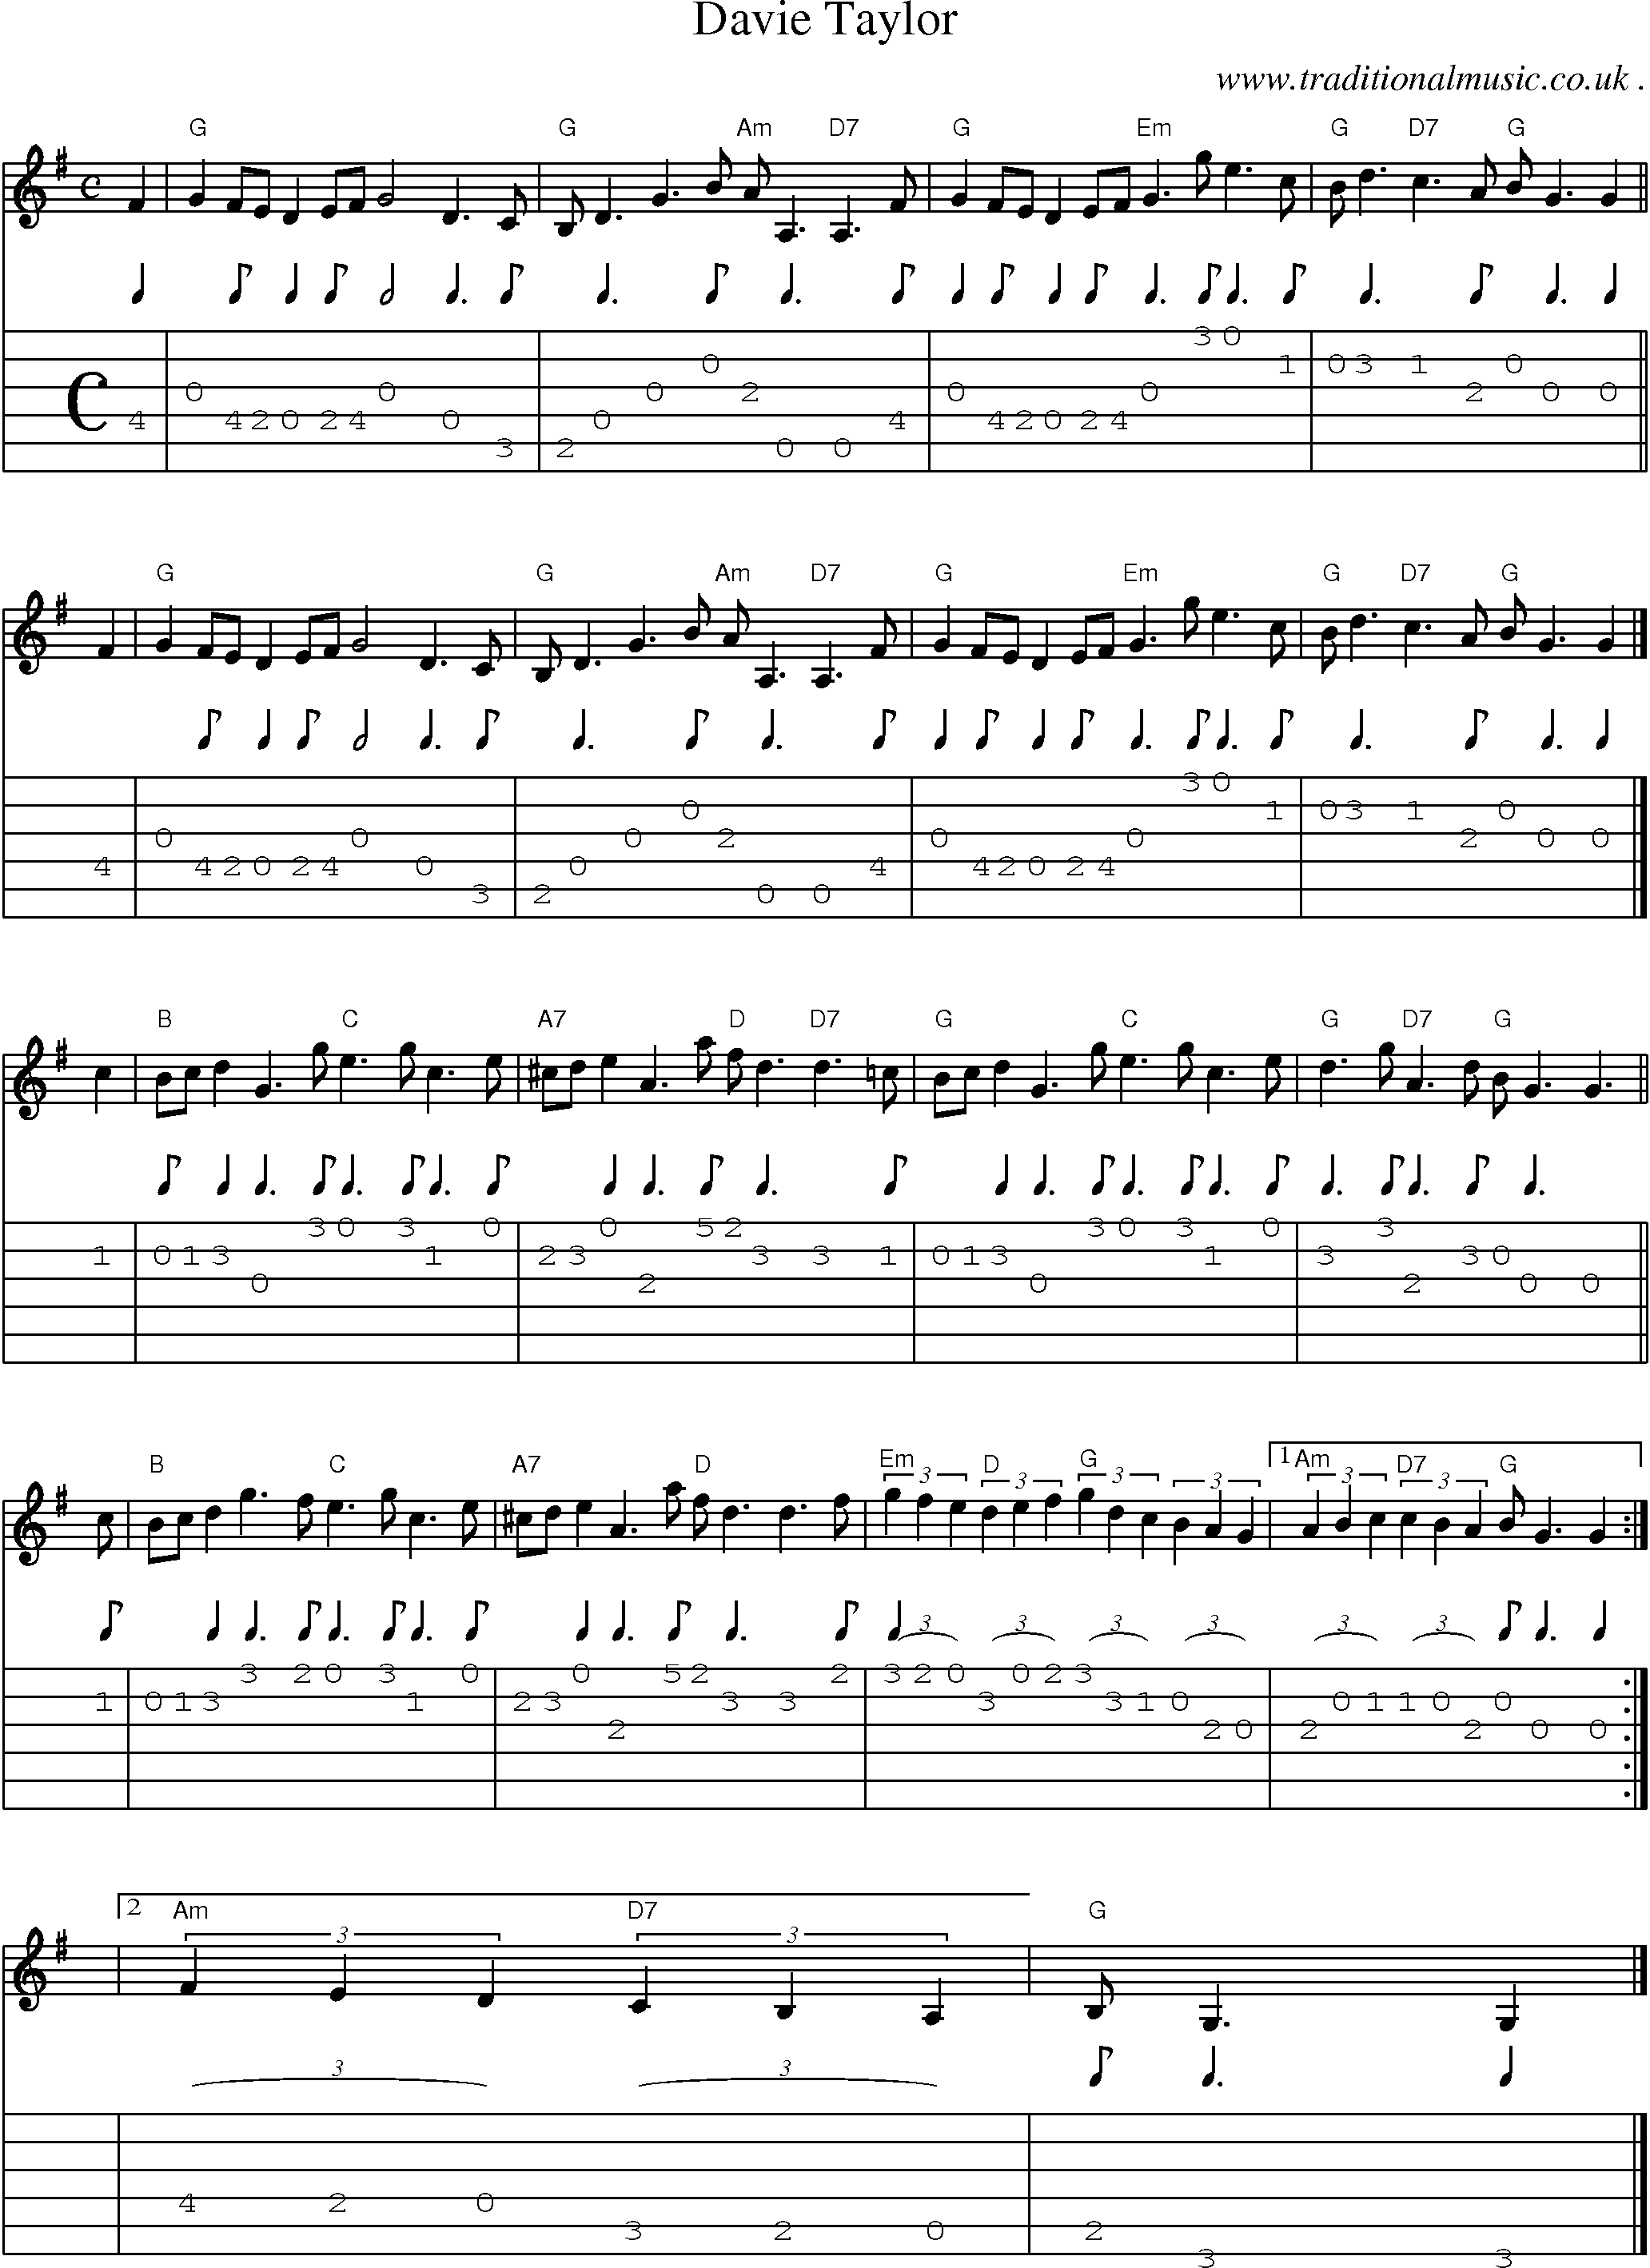 Sheet-music  score, Chords and Guitar Tabs for Davie Taylor